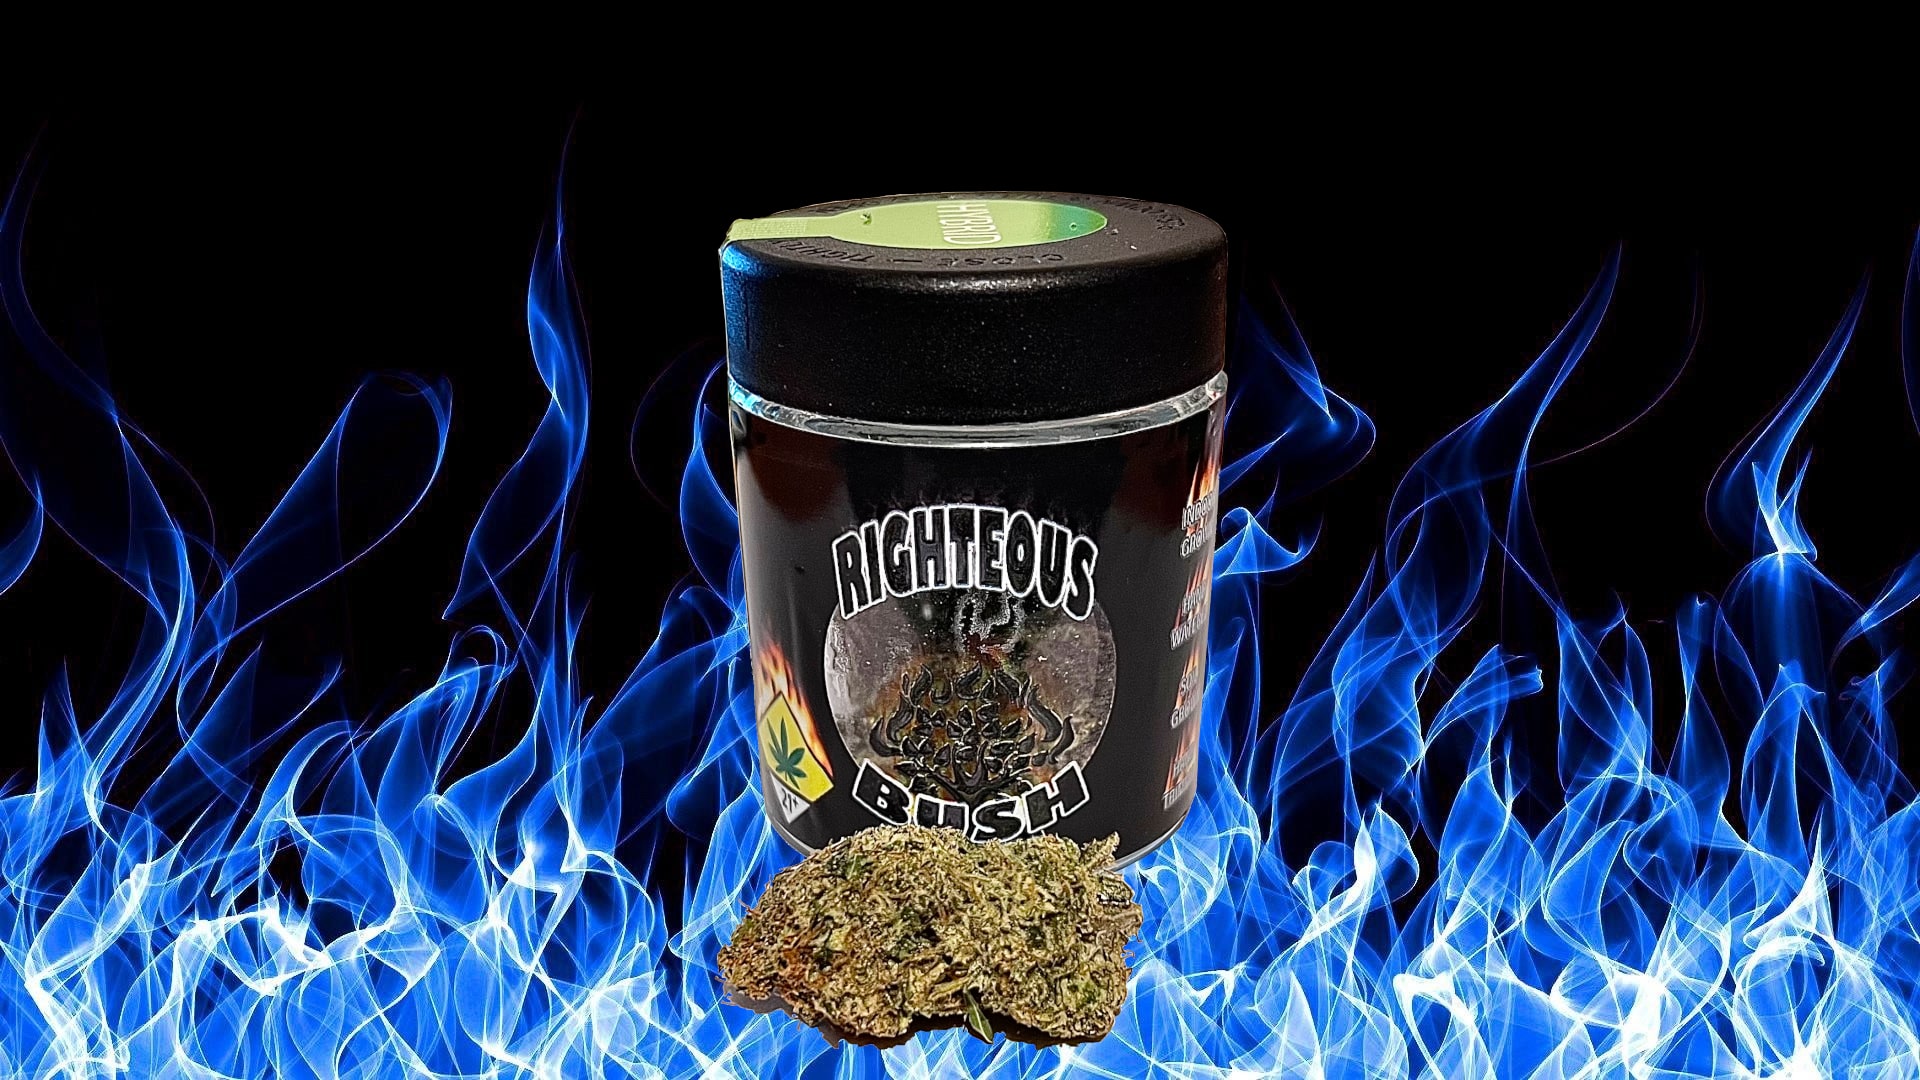 Pineapple Upside Down Cake Bud and Jar surrounded by blue flame